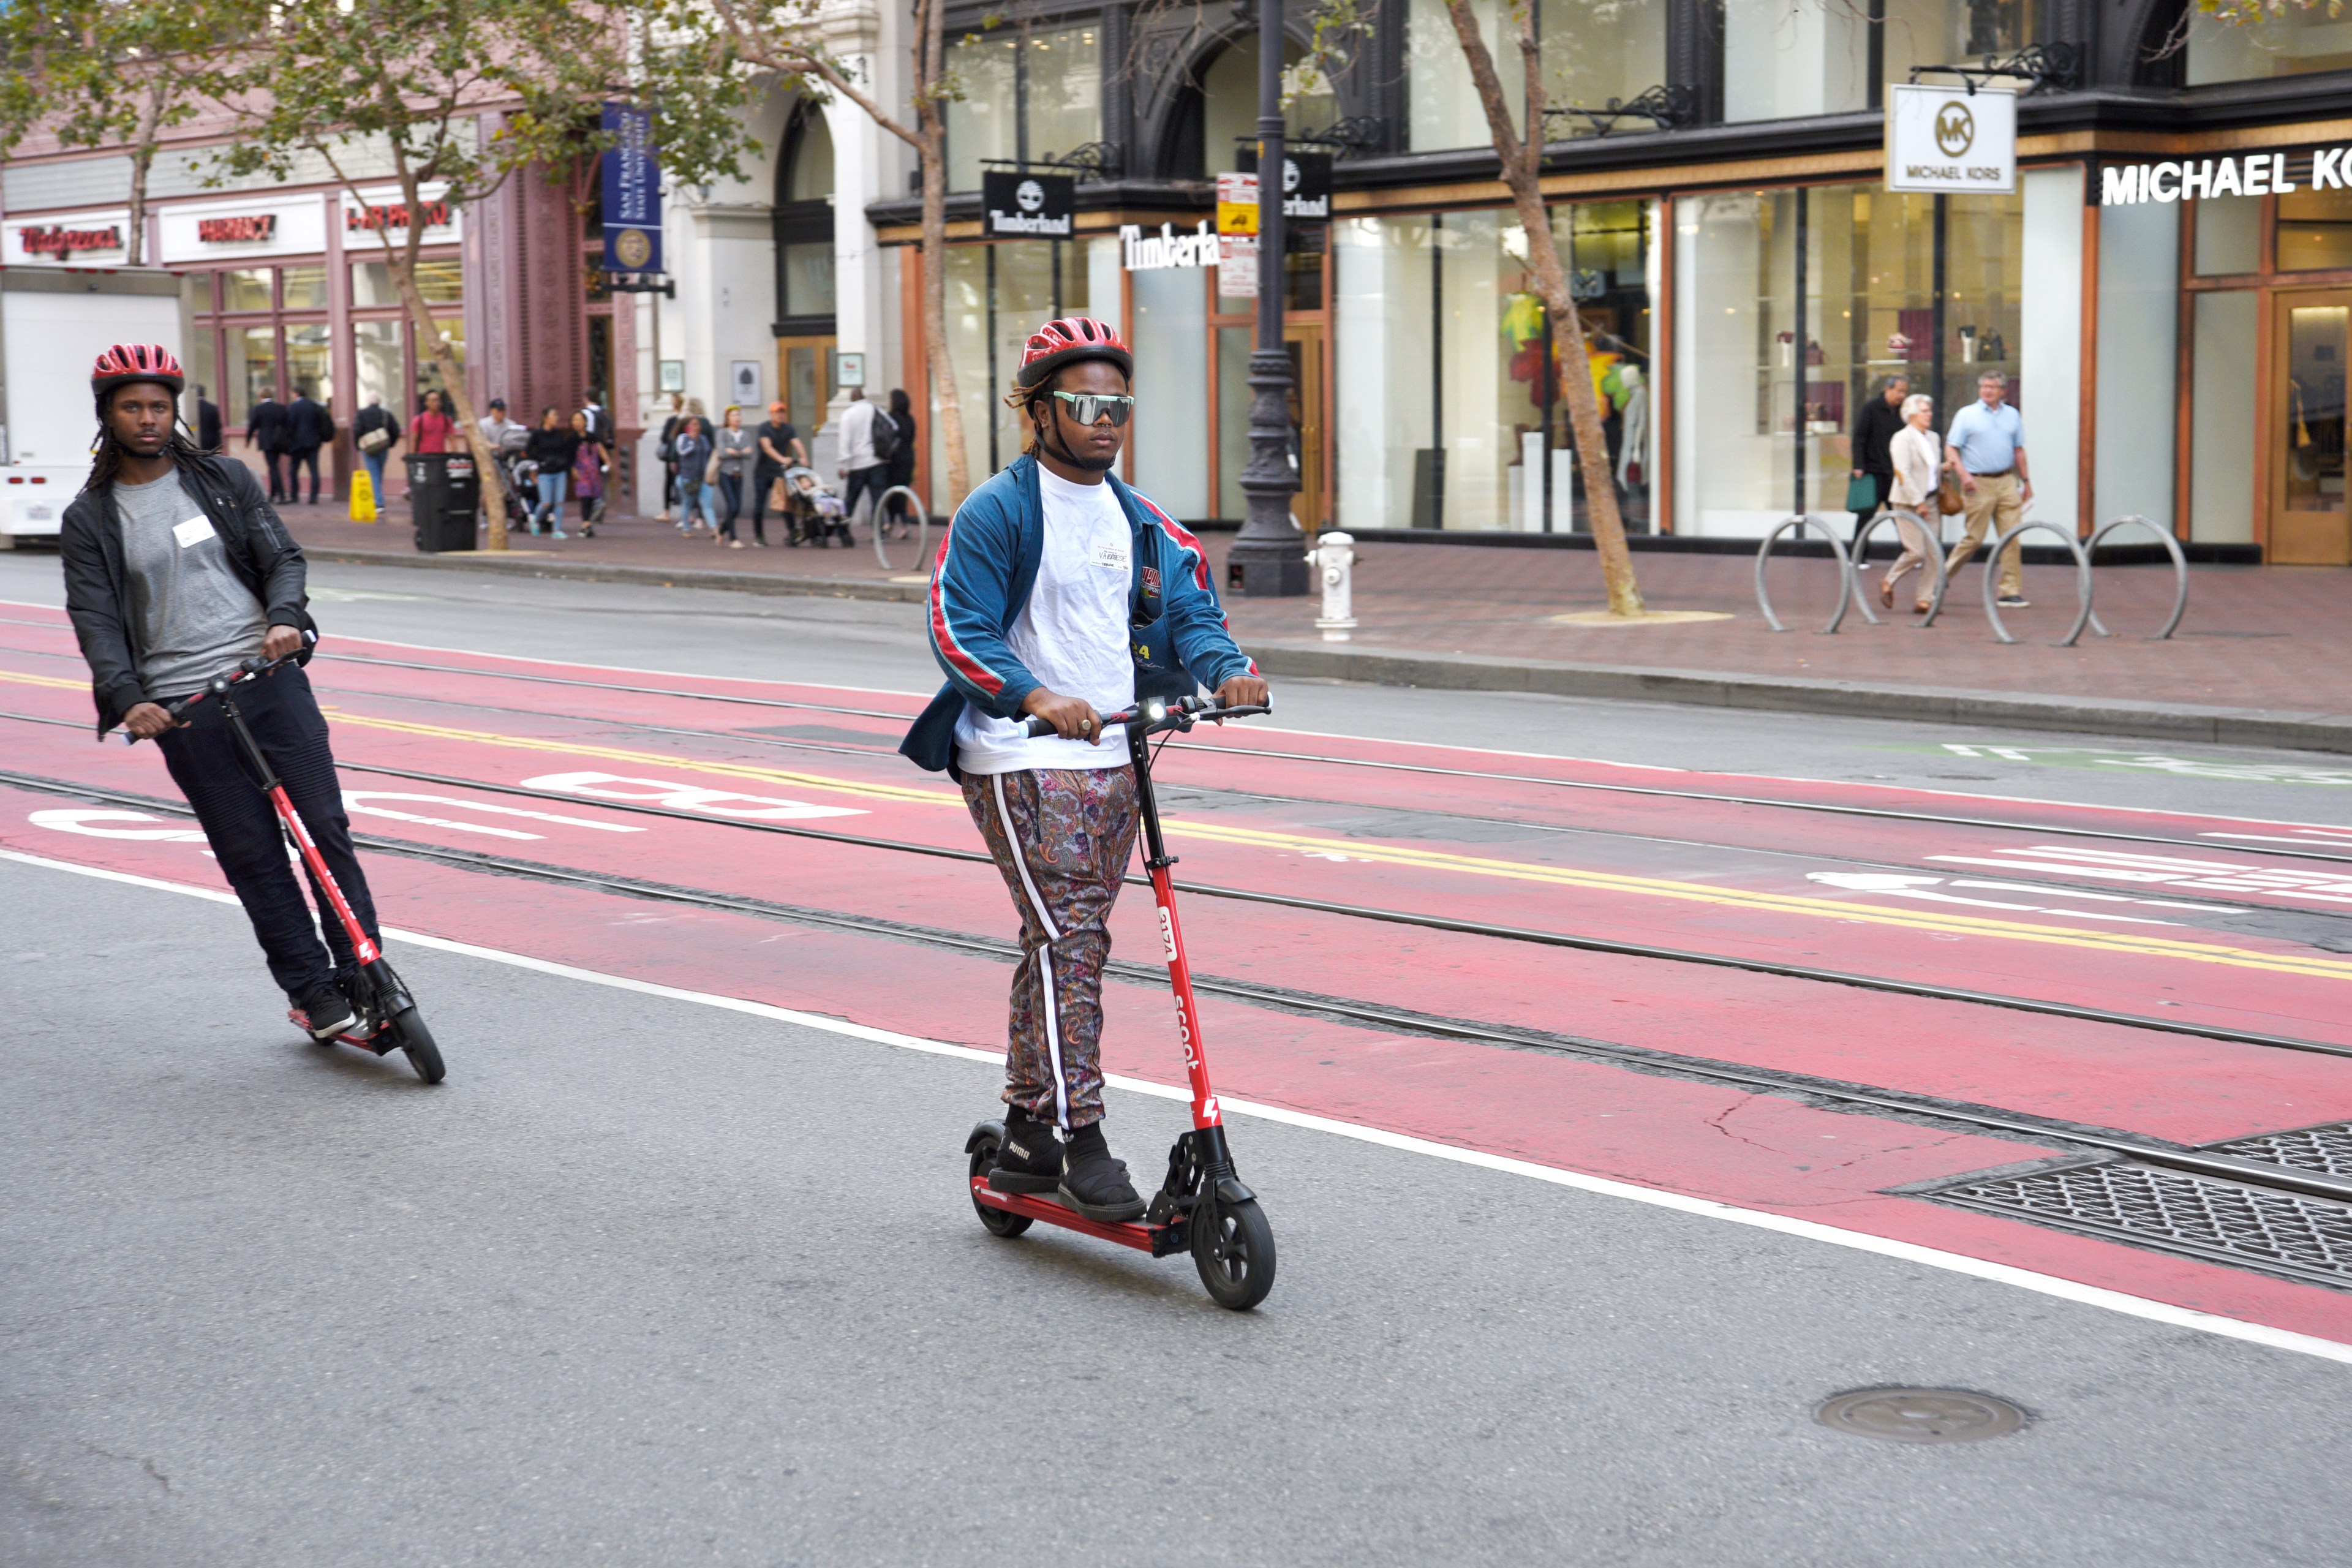 San Francisco’s Electric Scooter Deaths and Injuries Shot Up Since Pandemic